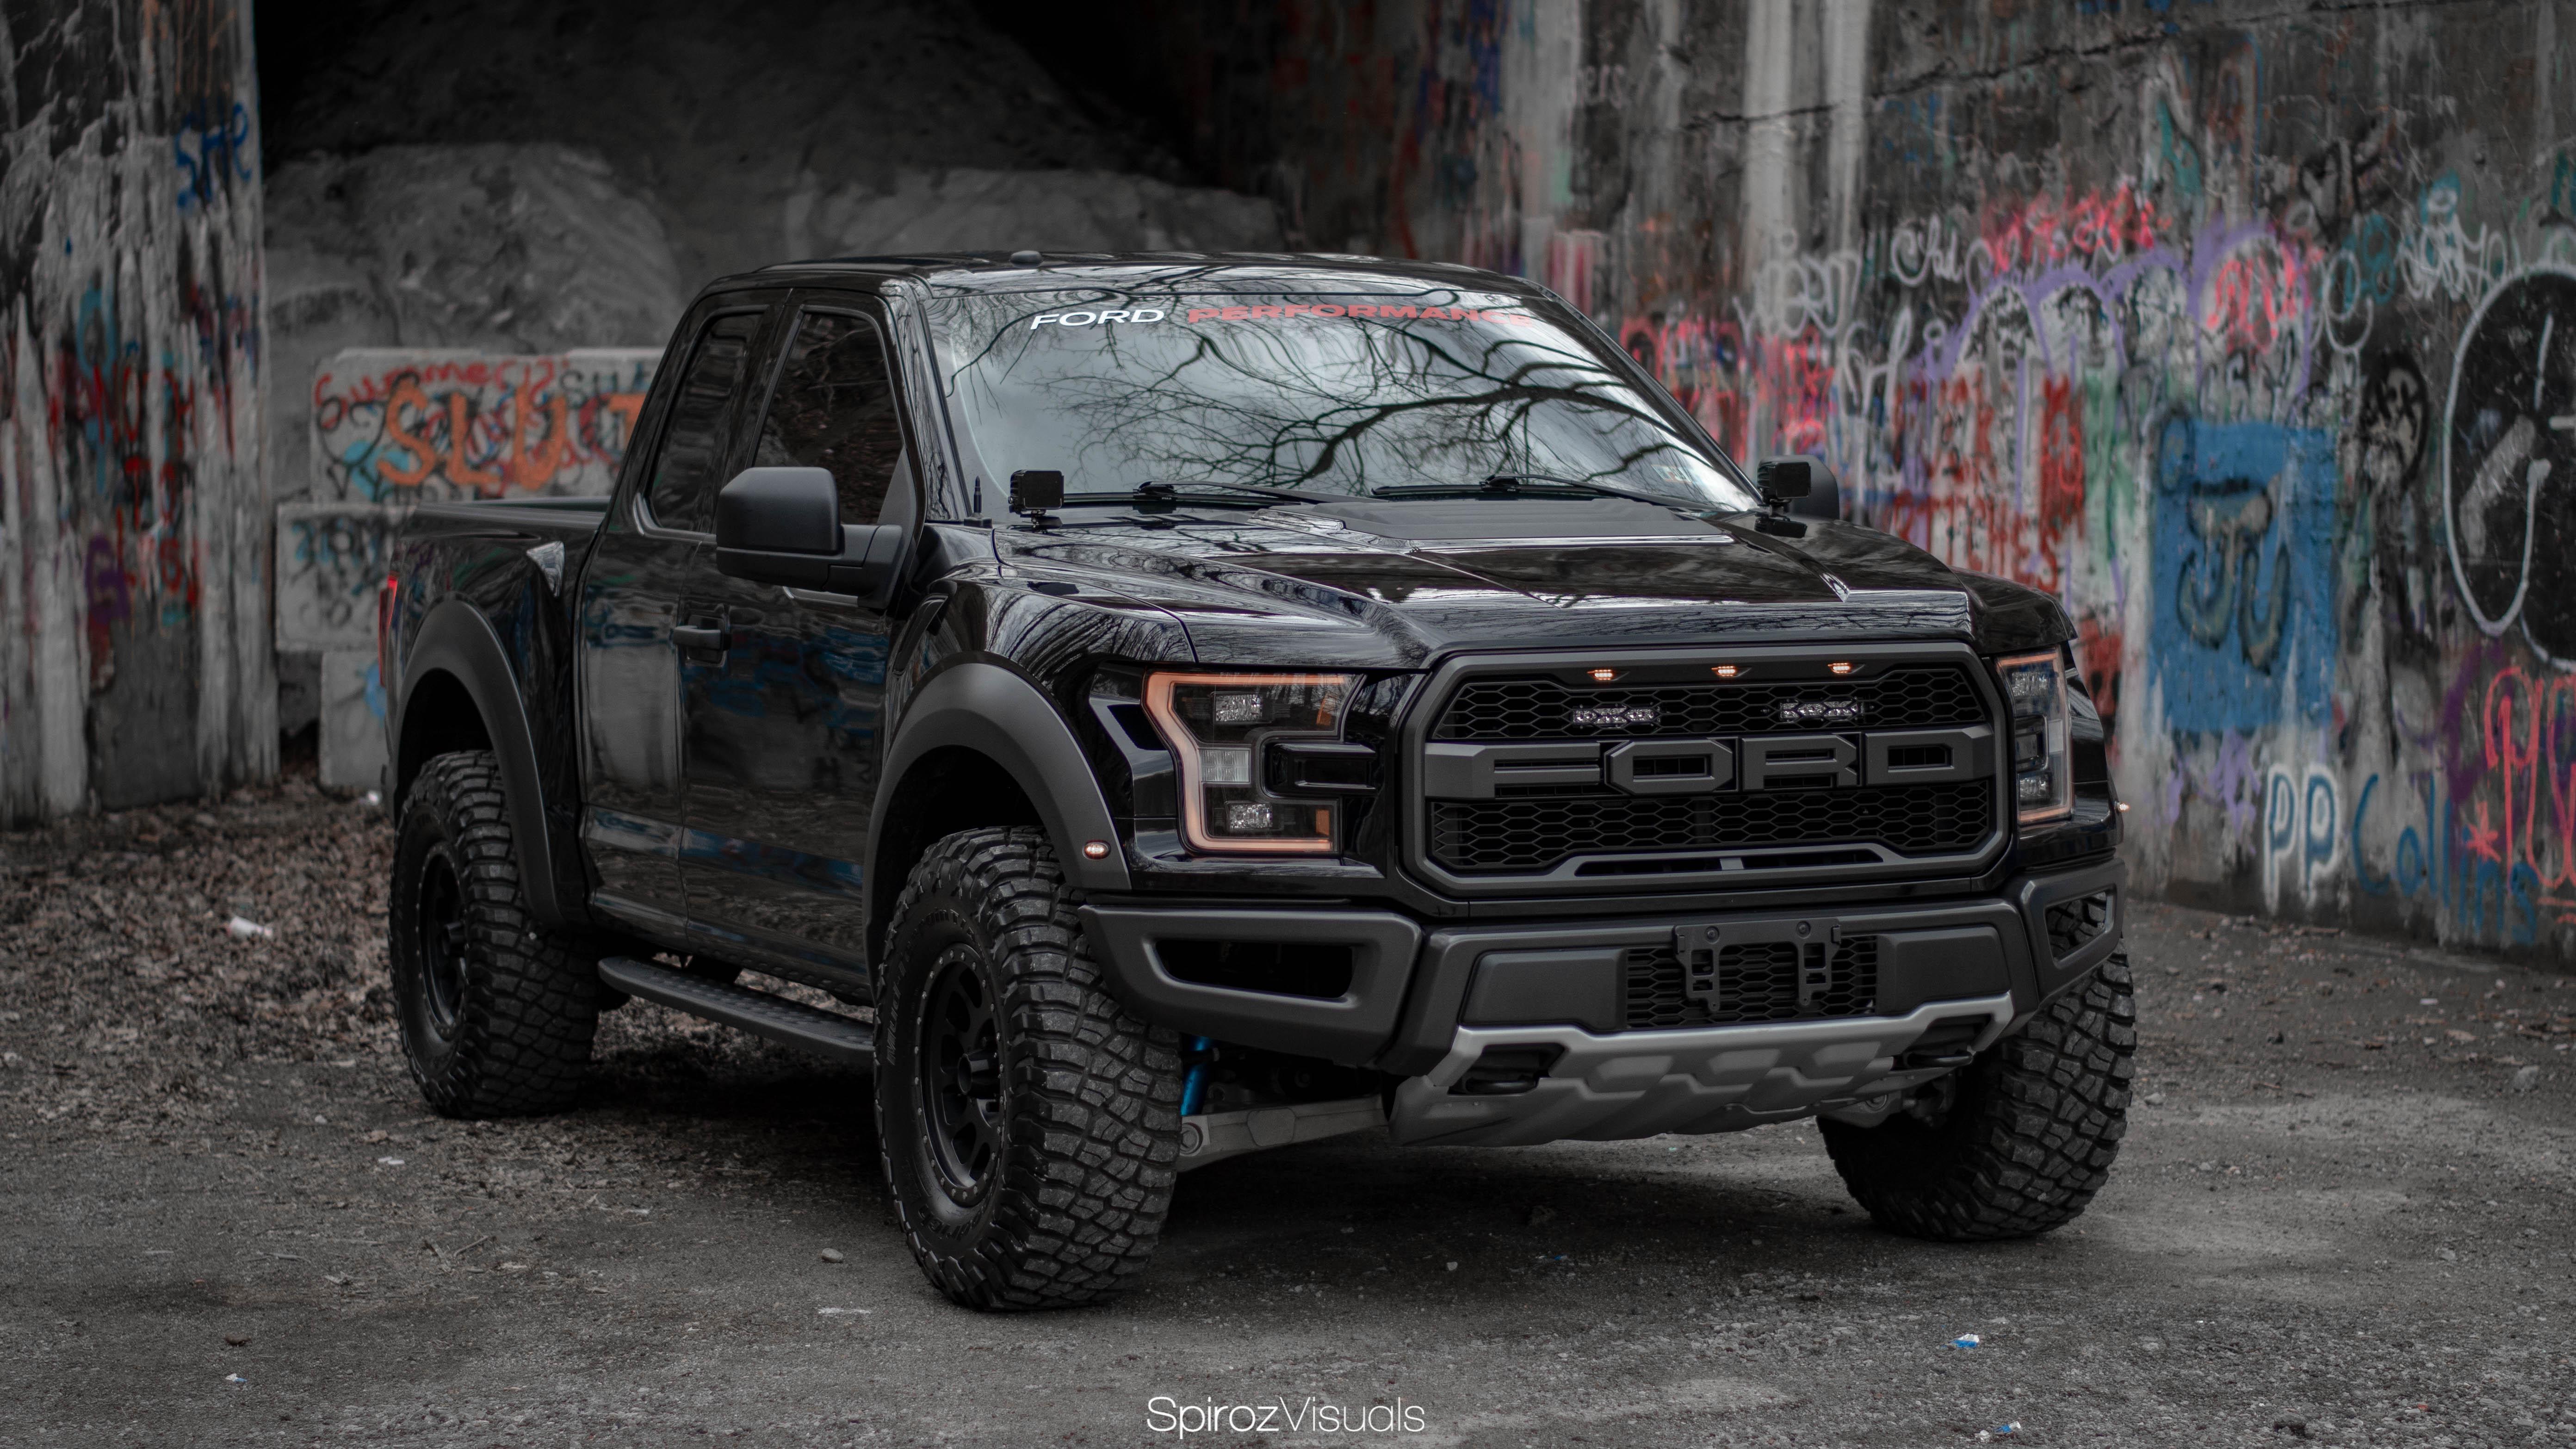 Ford Raptor Wallpapers Top Free Ford Raptor Backgrounds Wallpaperaccess ...